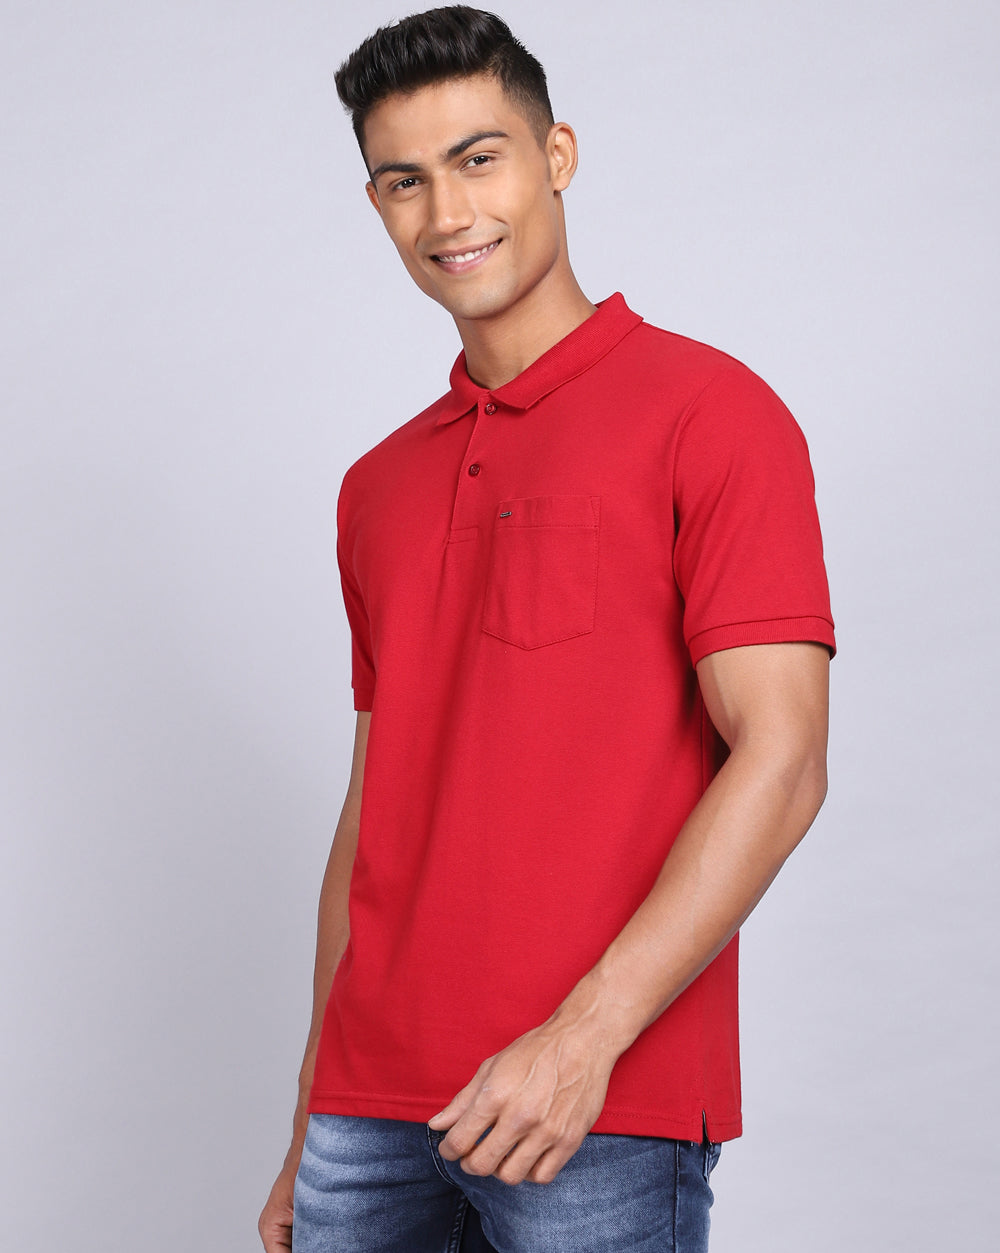 Regular Fit 2 Button Polo T-Shirt Red